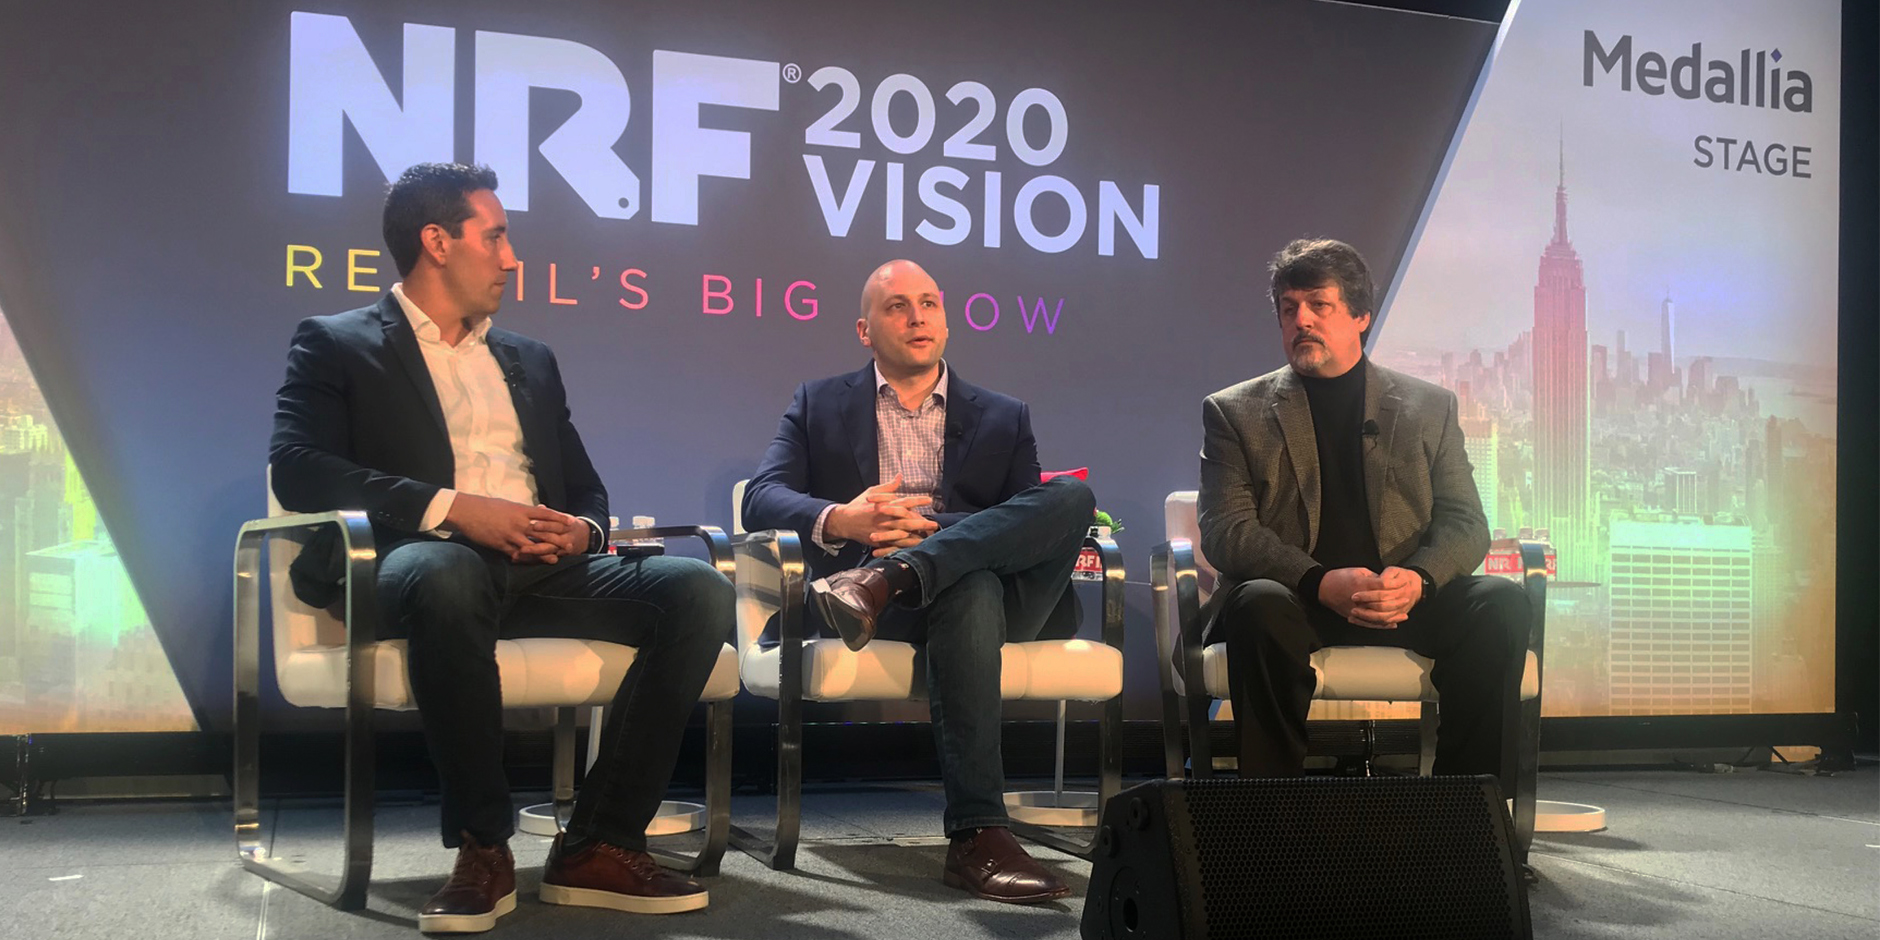 "Three men sit in chairs onstage in front of a big screen showing the NRF Big Show logo"